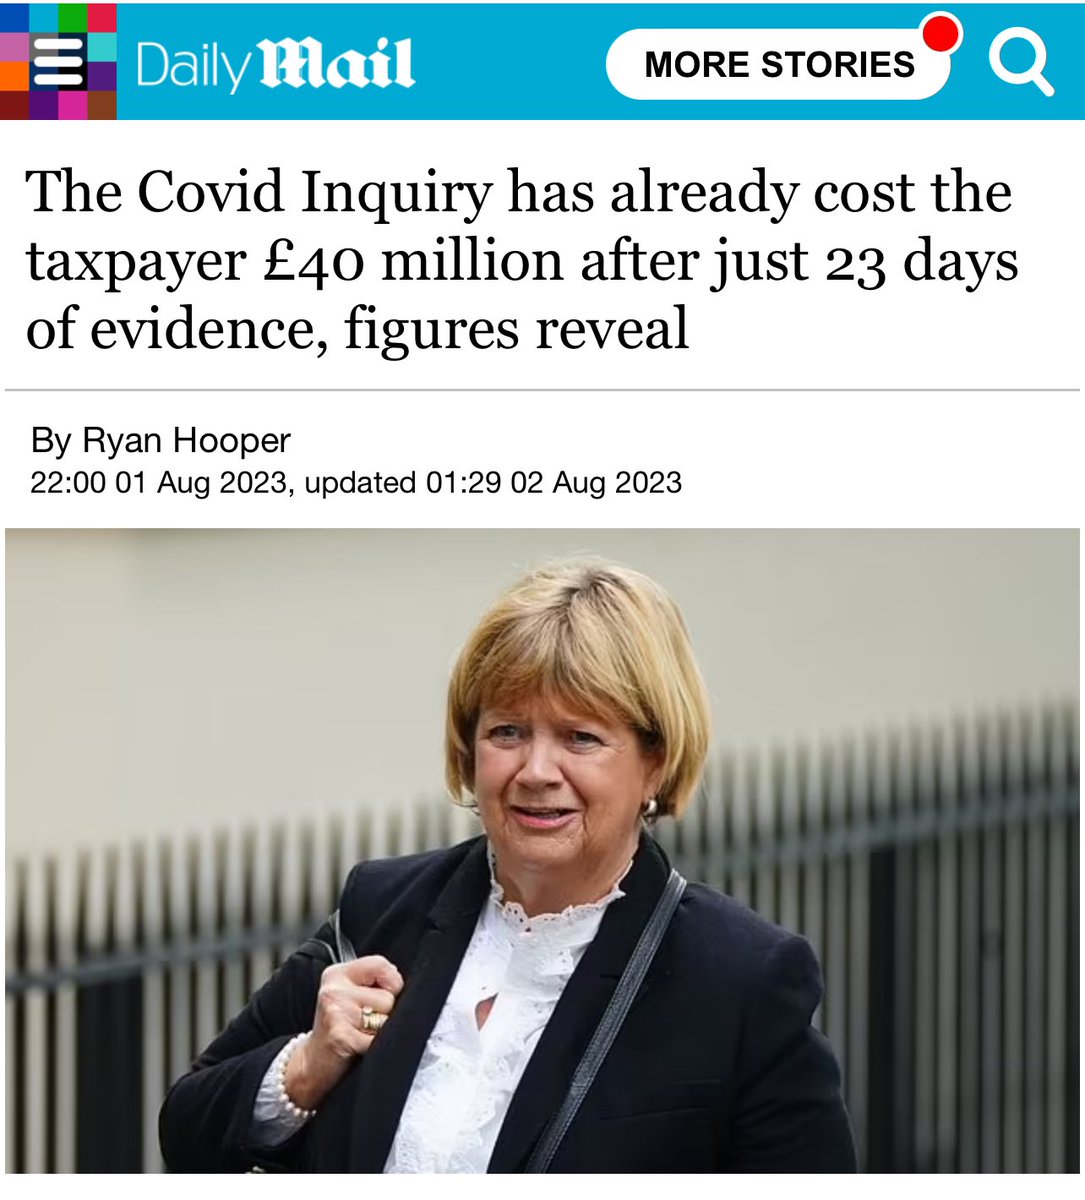 Interesting, A year ago it was announced the #CovidInquiry had cost £40 Million in just 23 days yet a year later government statistics show it’s currently costed £44 million, who’s working the figures , #NadhimZahawi?? 

dailymail.co.uk/news/article-1… via @MailOnline